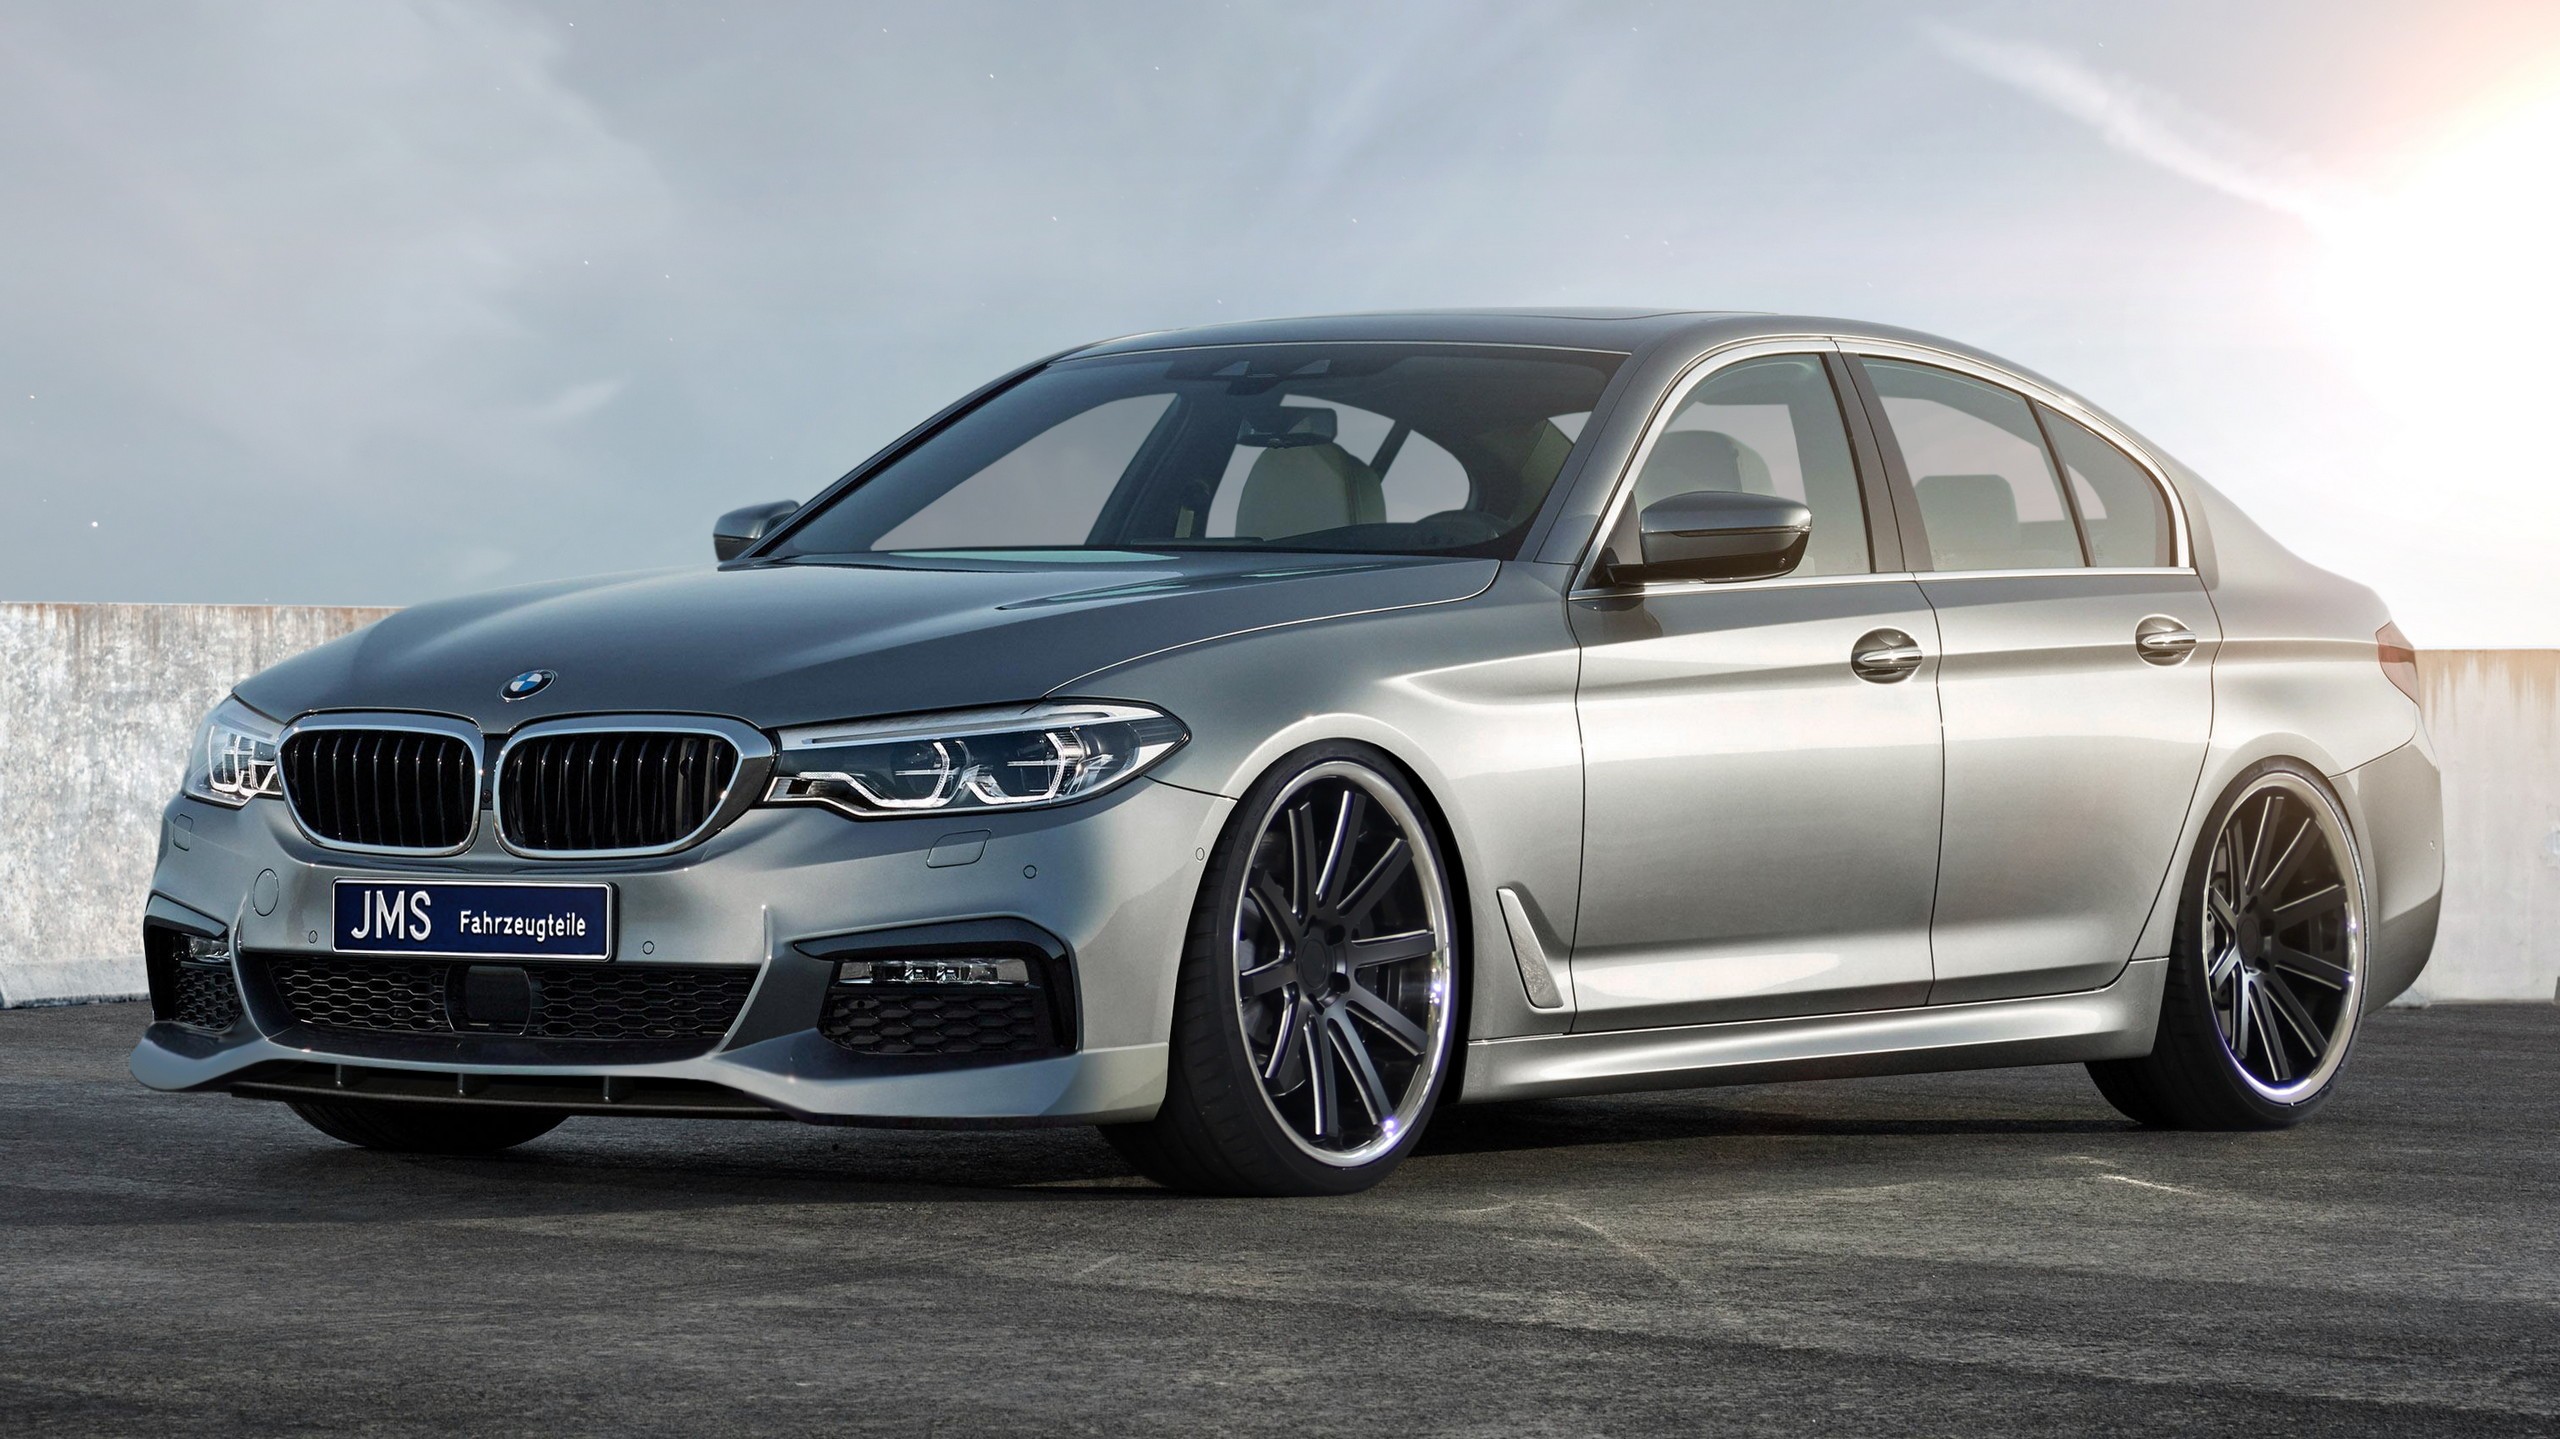 https://s1.cdn.autoevolution.com/images/news/gallery/tuner-wants-to-make-your-g30-g31-bmw-5-series-sportier-with-new-add-ons-what-say-you_2.jpg